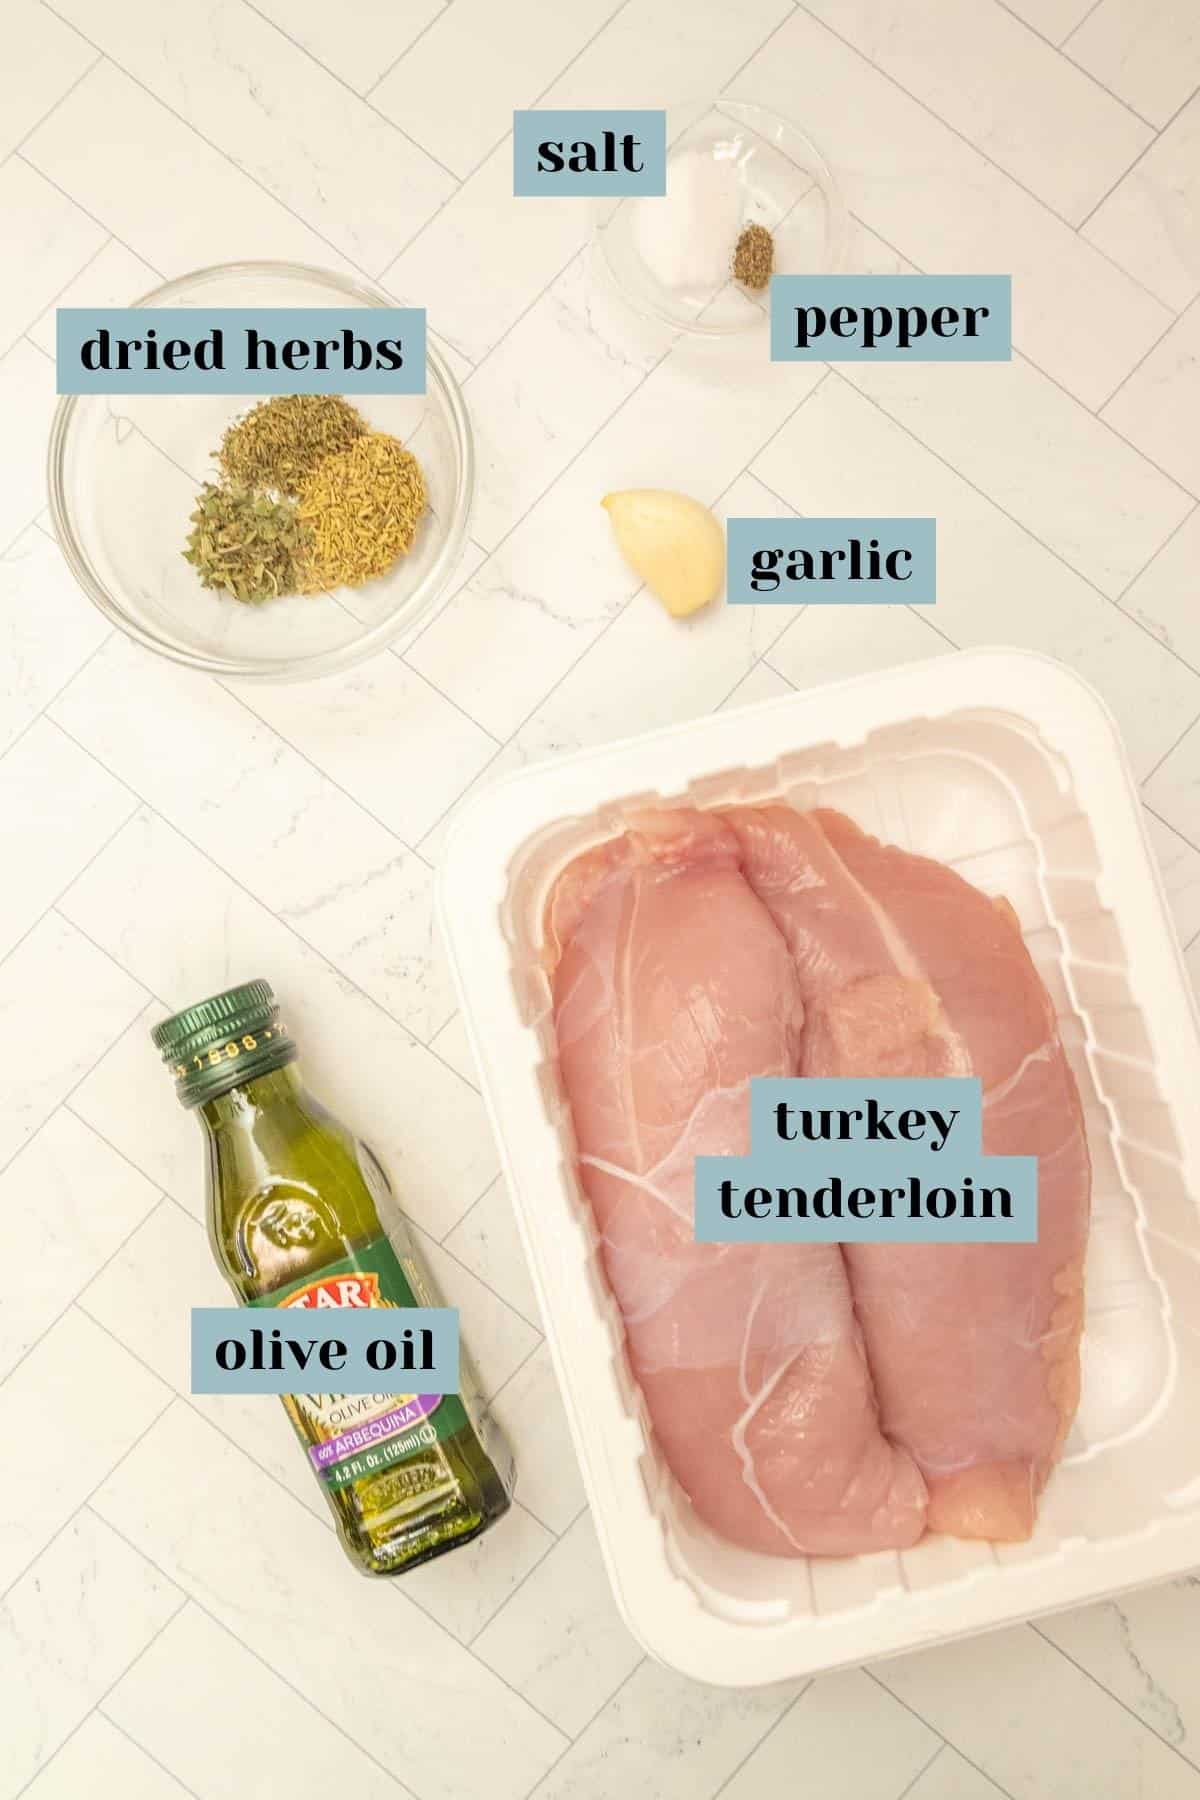 The ingredients for a turkey dish are shown.